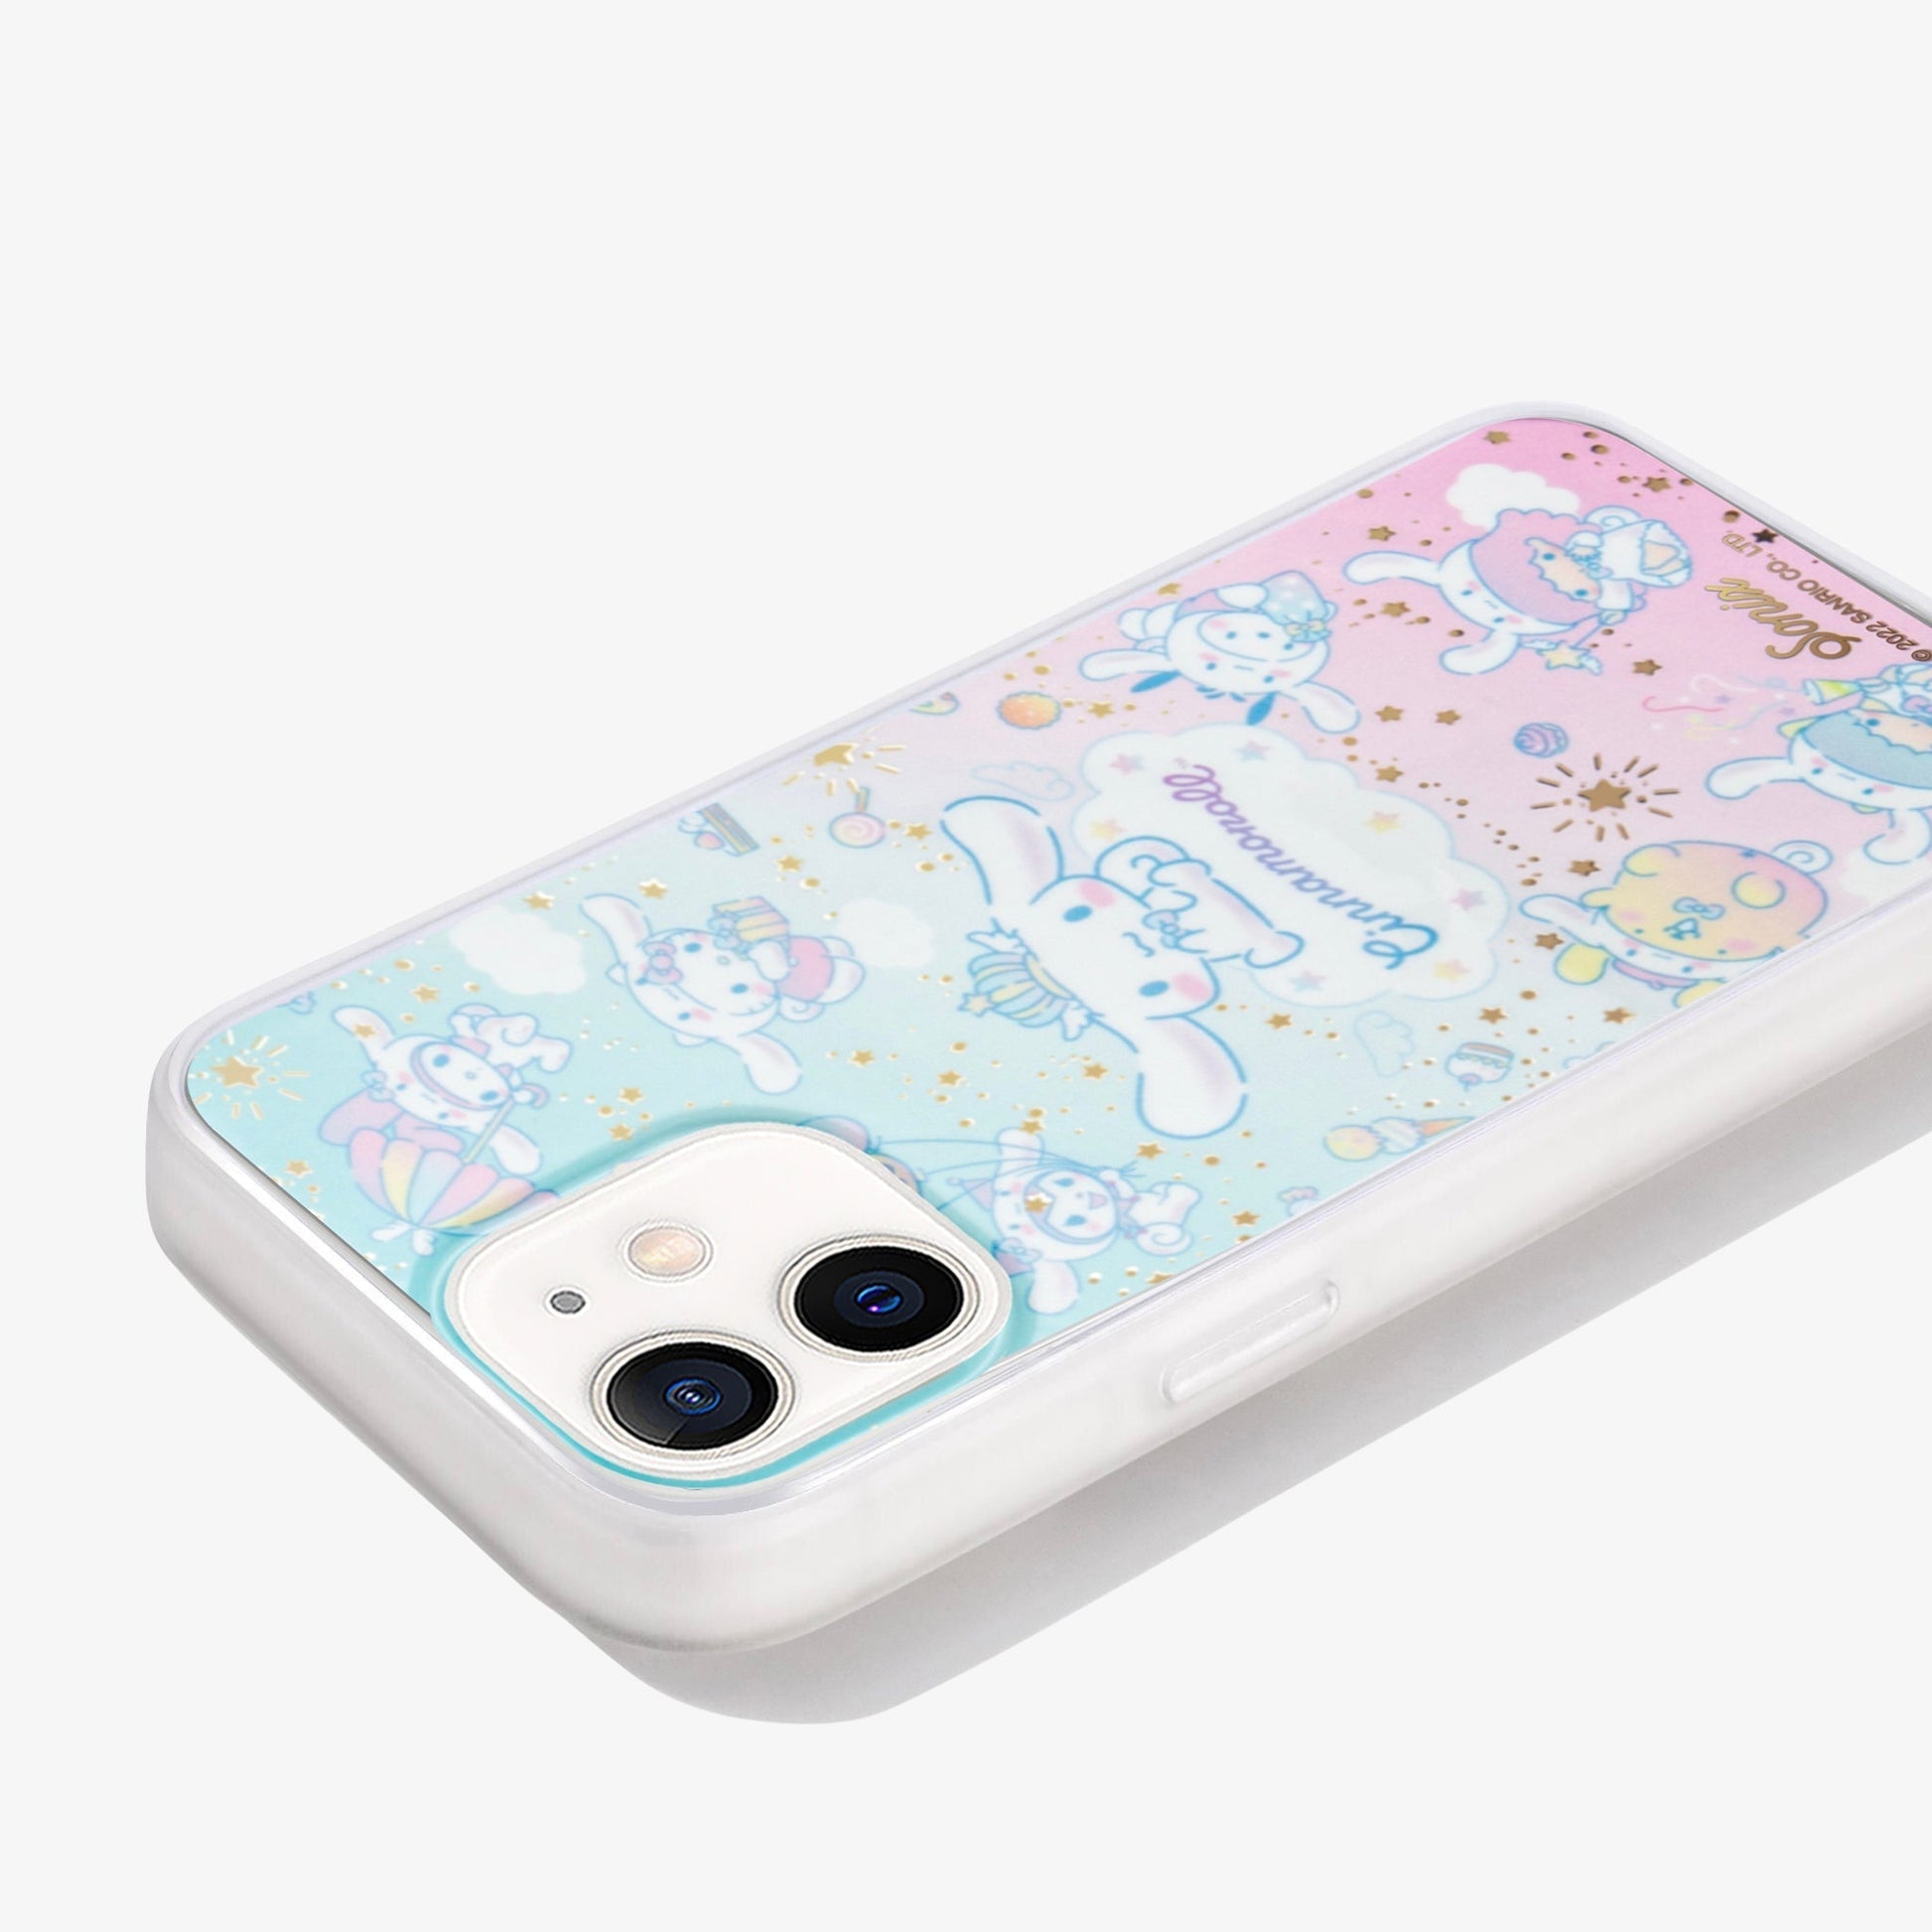 Pink and blue iphone case with gold stars, clouds, and hello kitty character cinnamoroll on an iphone 12 side view